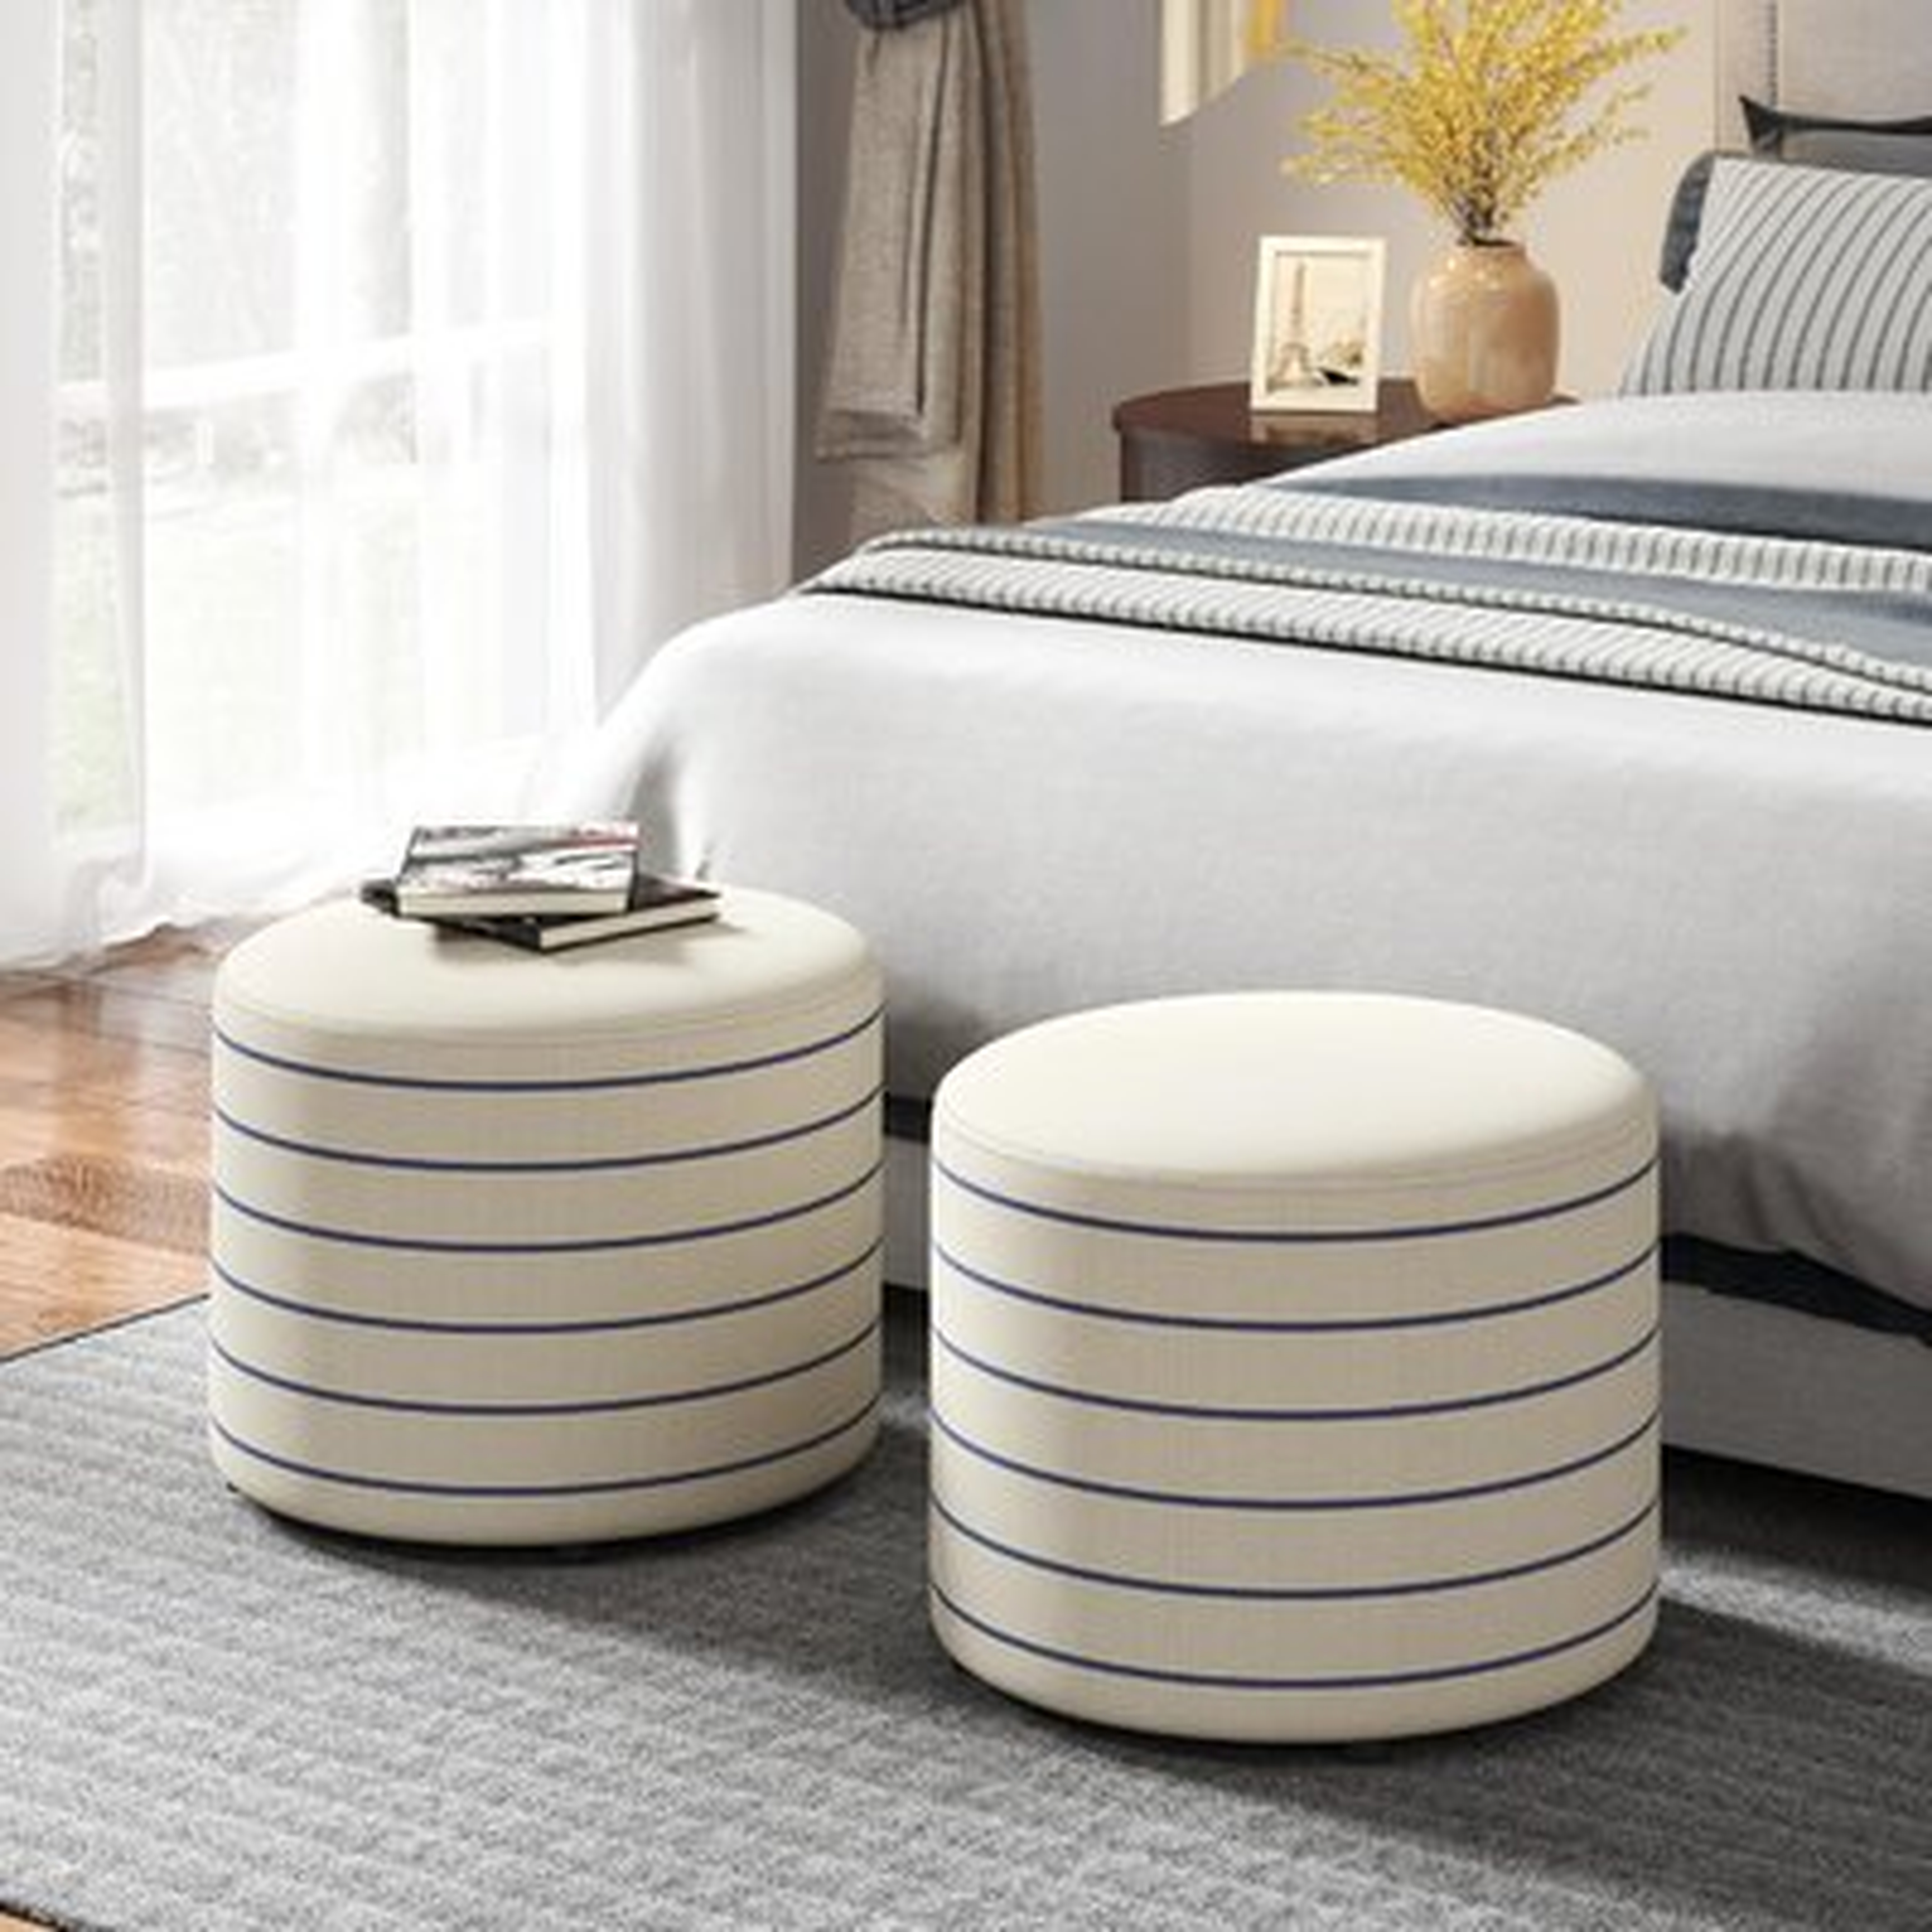 Fabric Round Ottoman Stool Set Of 2, Small Ottoman Footrest Stool Bench Footstool Coffee Table For Living Room Bedroom, Light Beige With Blue Stripes - Wayfair